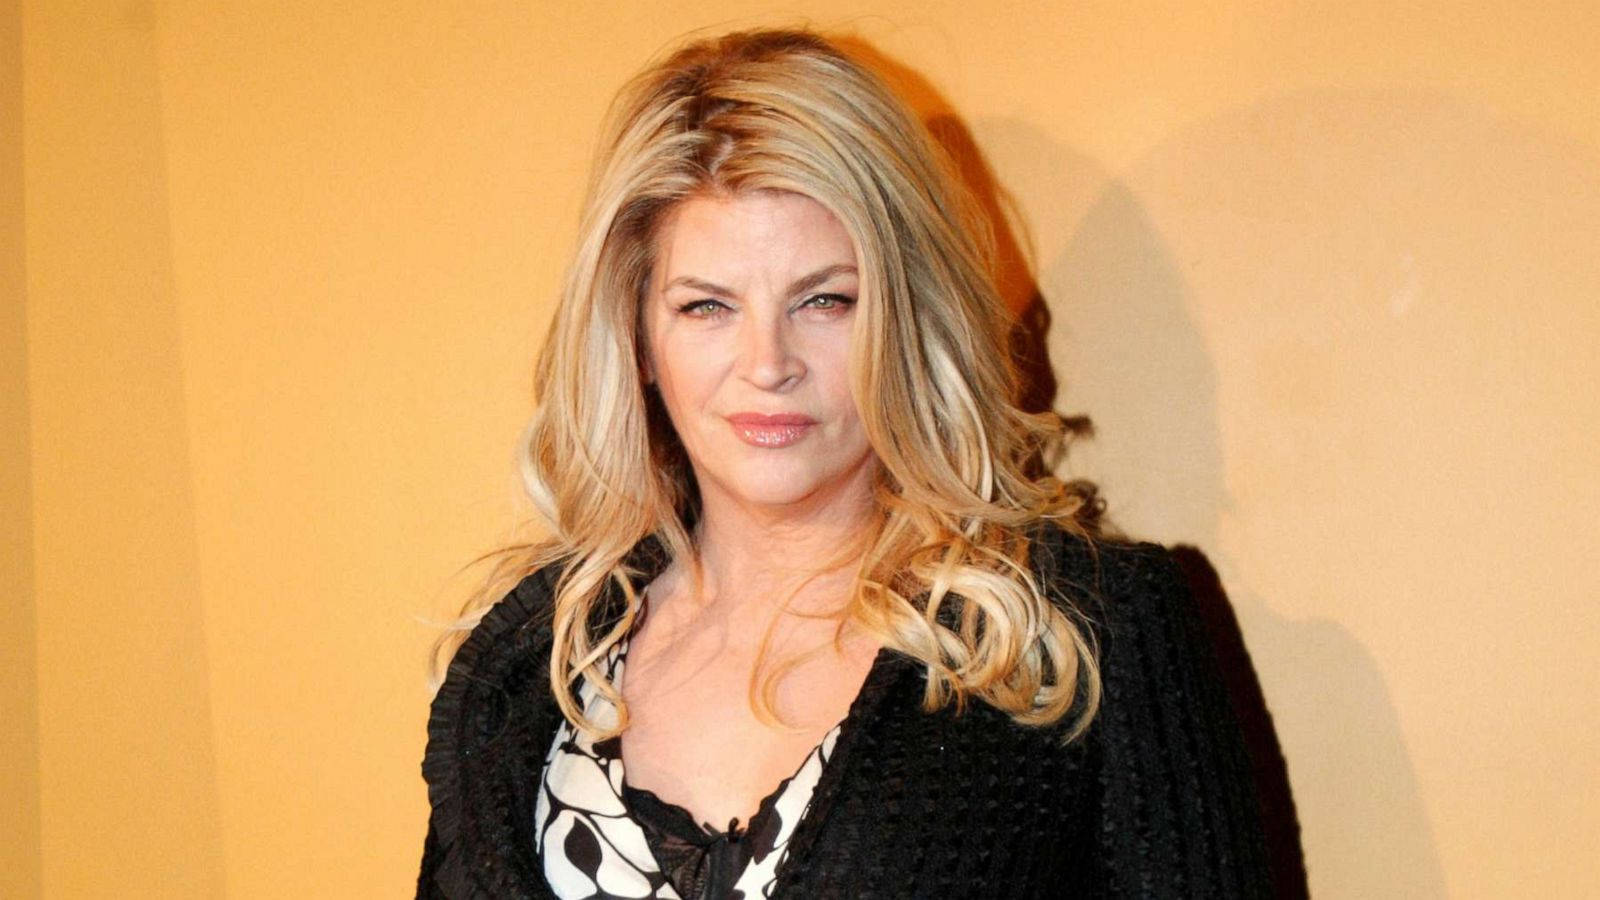 American Kirstie Alley In A Black And White Outfit Wallpaper